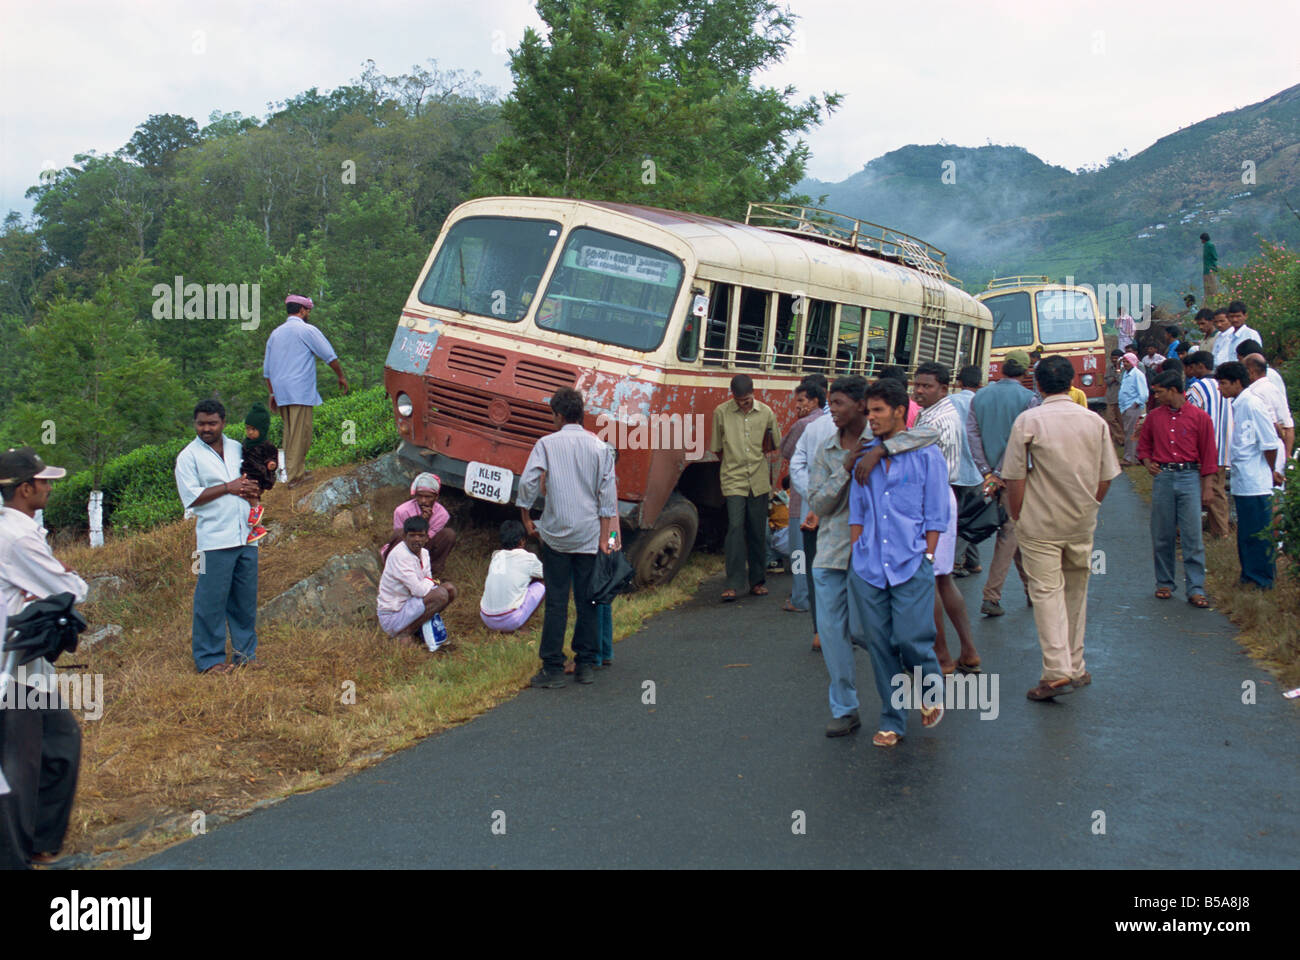 Bus accident near Munnar, Western Ghats, Kerala state, India Stock Photo